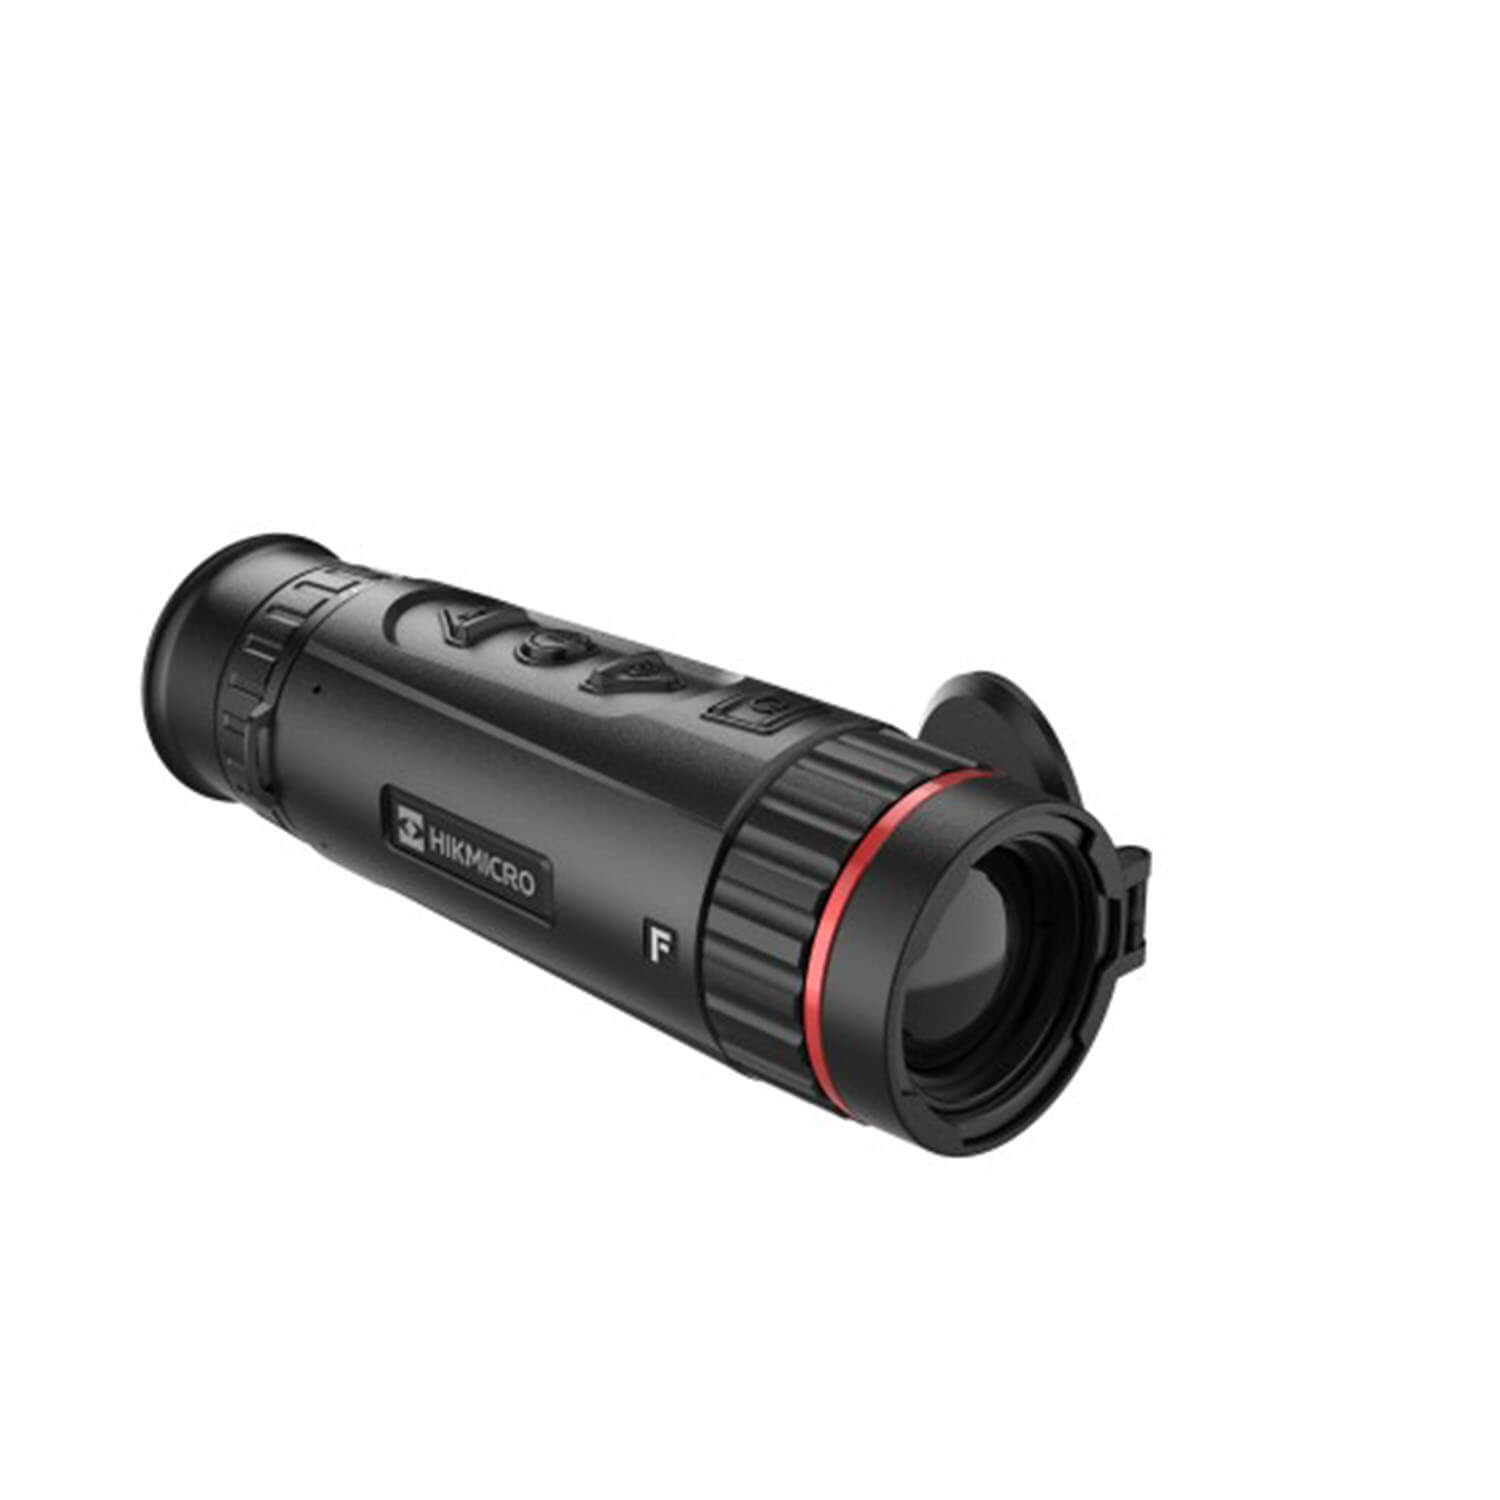 Hikmicro thermal imaging scope Falcon FH25 - Night Vision Devices